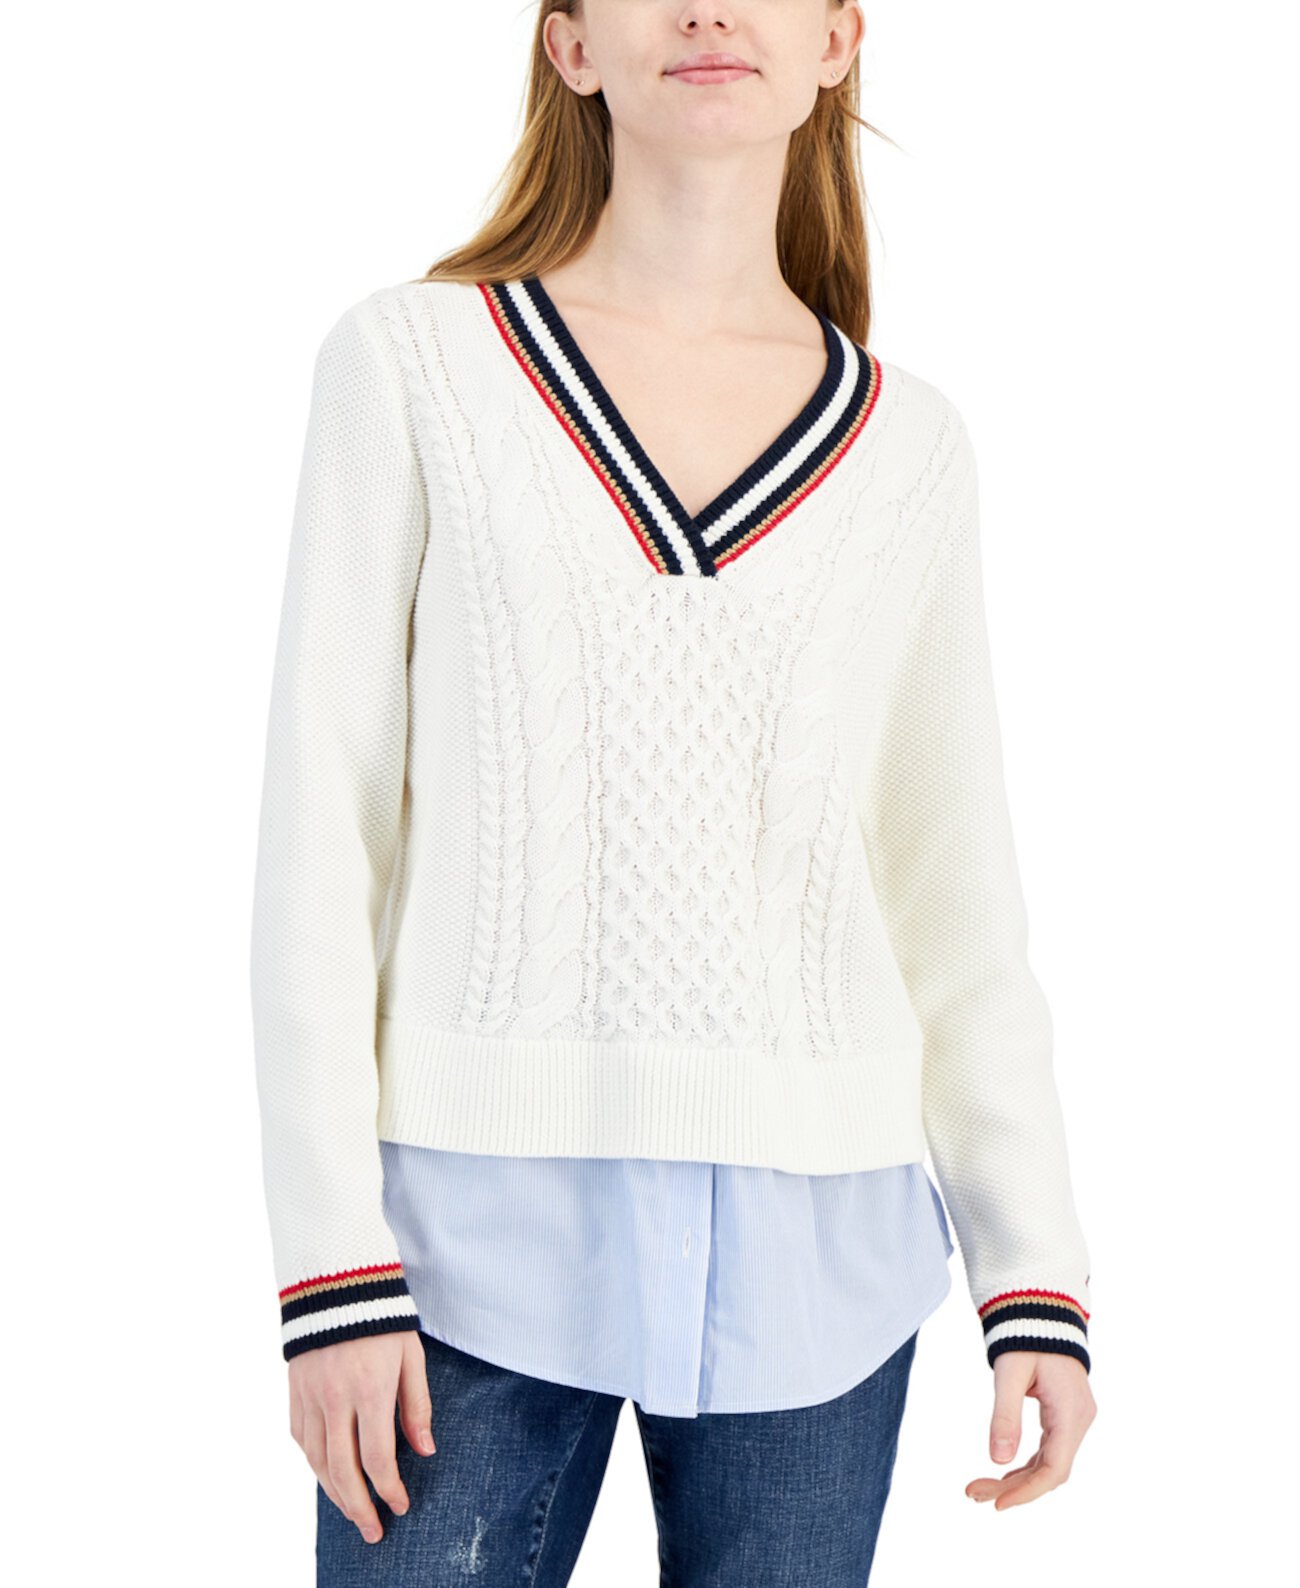 Women's Cable-Knit Layered-Look Sweater Tommy Hilfiger